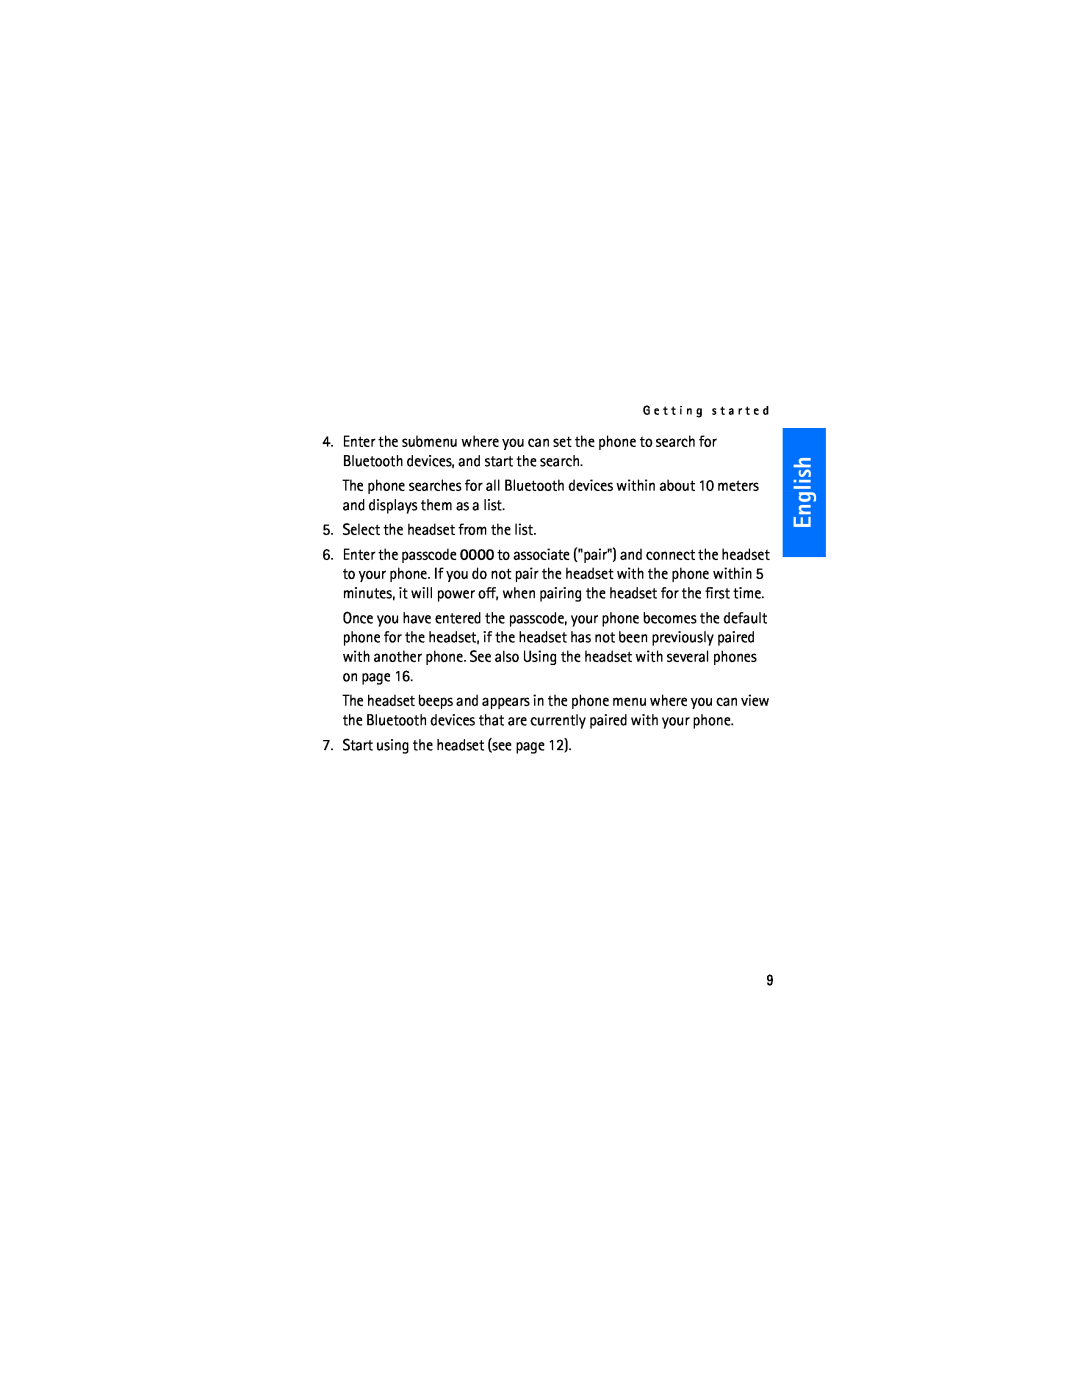 Nokia HDW-3 manual English, Select the headset from the list 